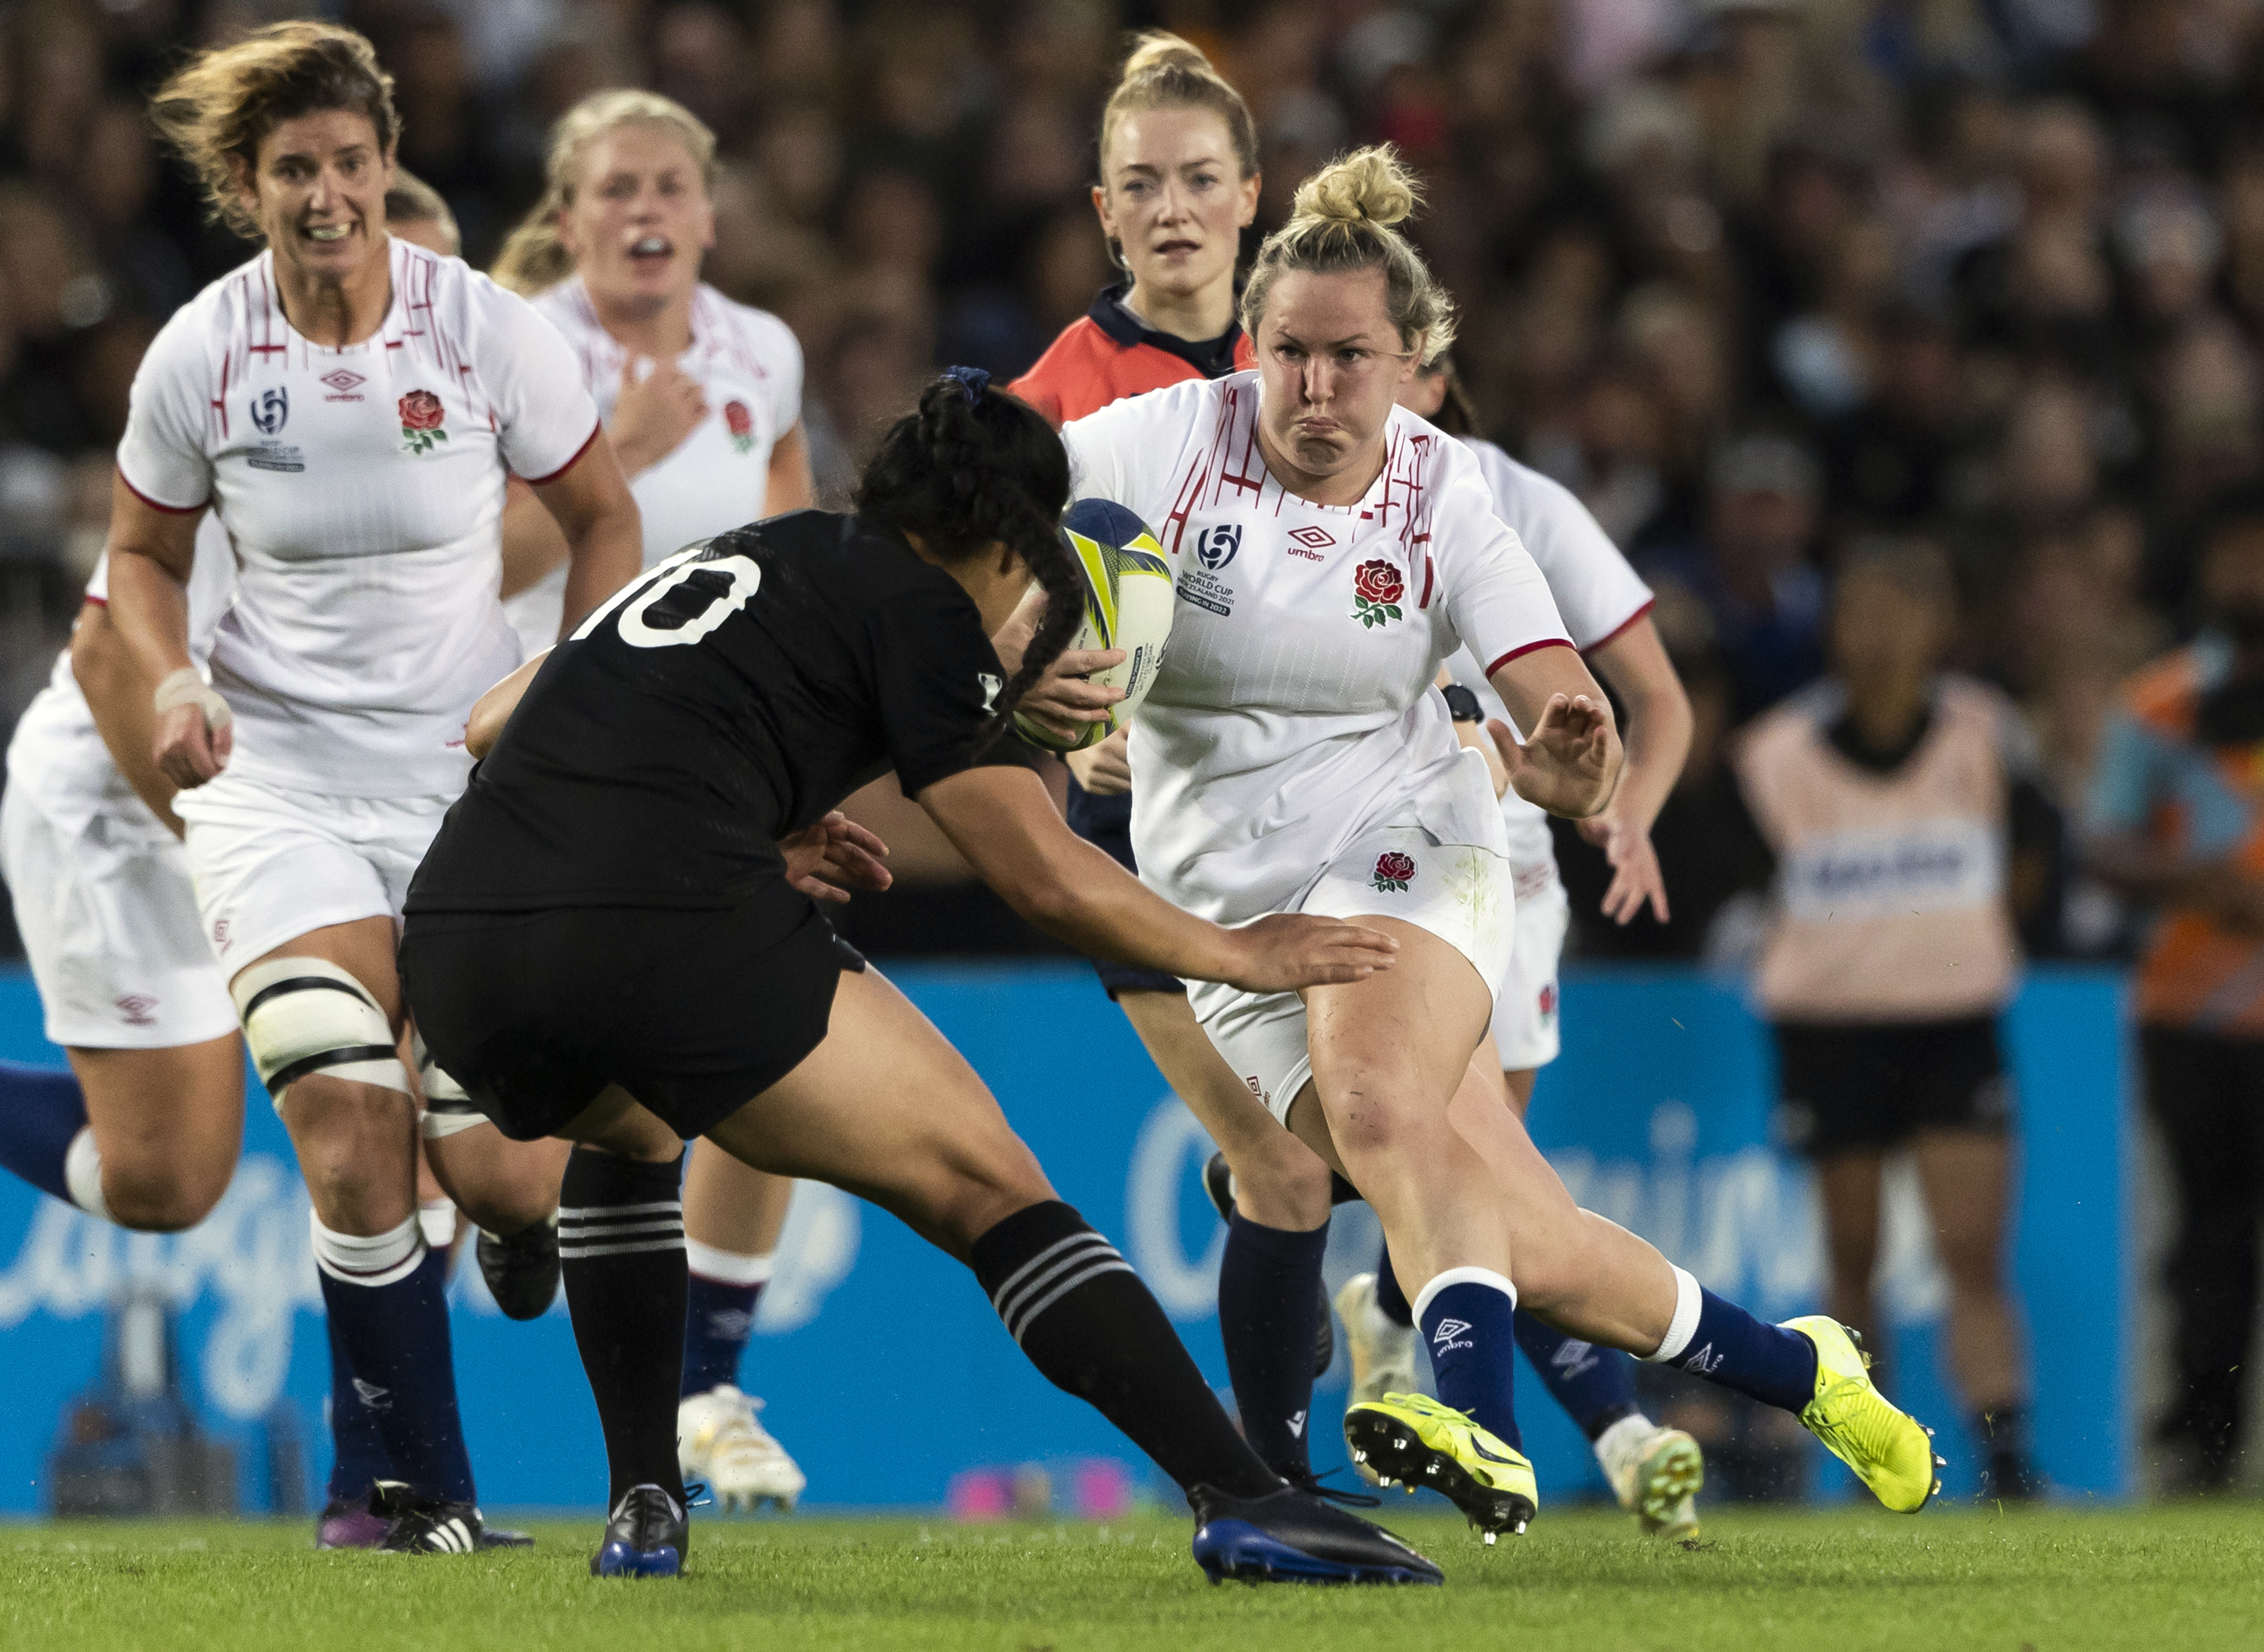 New Zealand wins 34-31 against England in Womens Rugby World Cup final ITV News